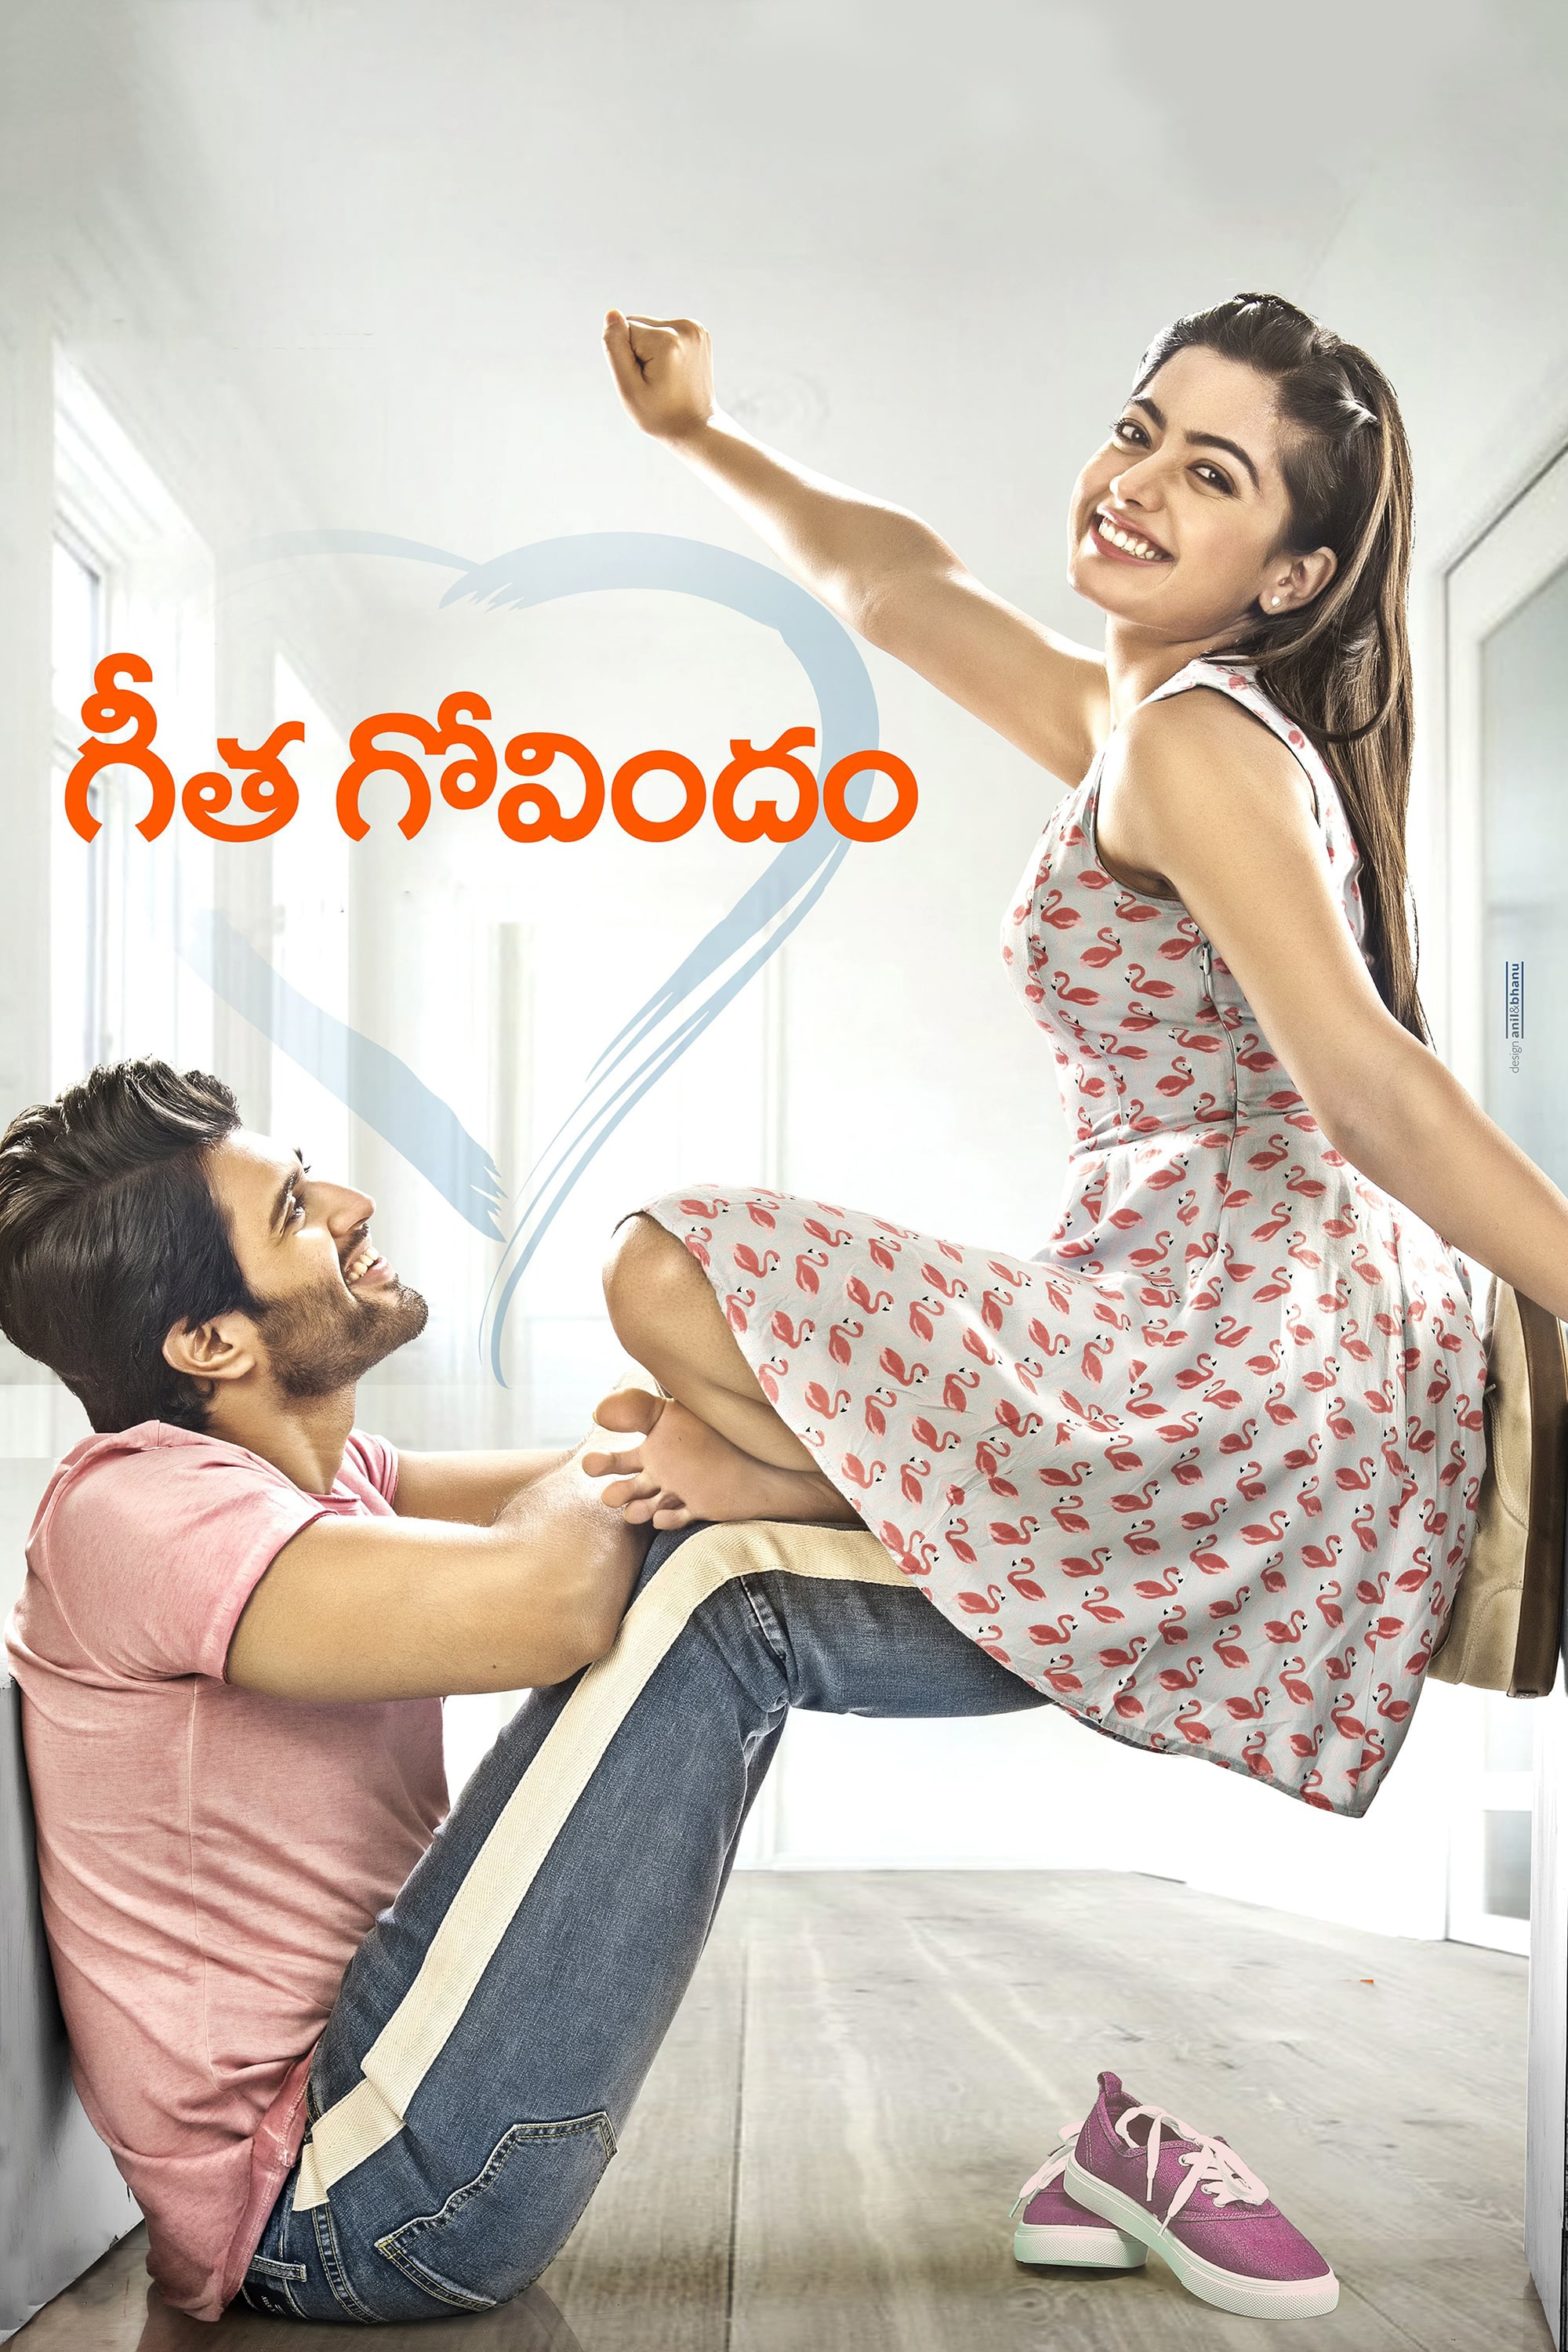 Poster for the movie "Geetha Govindam"